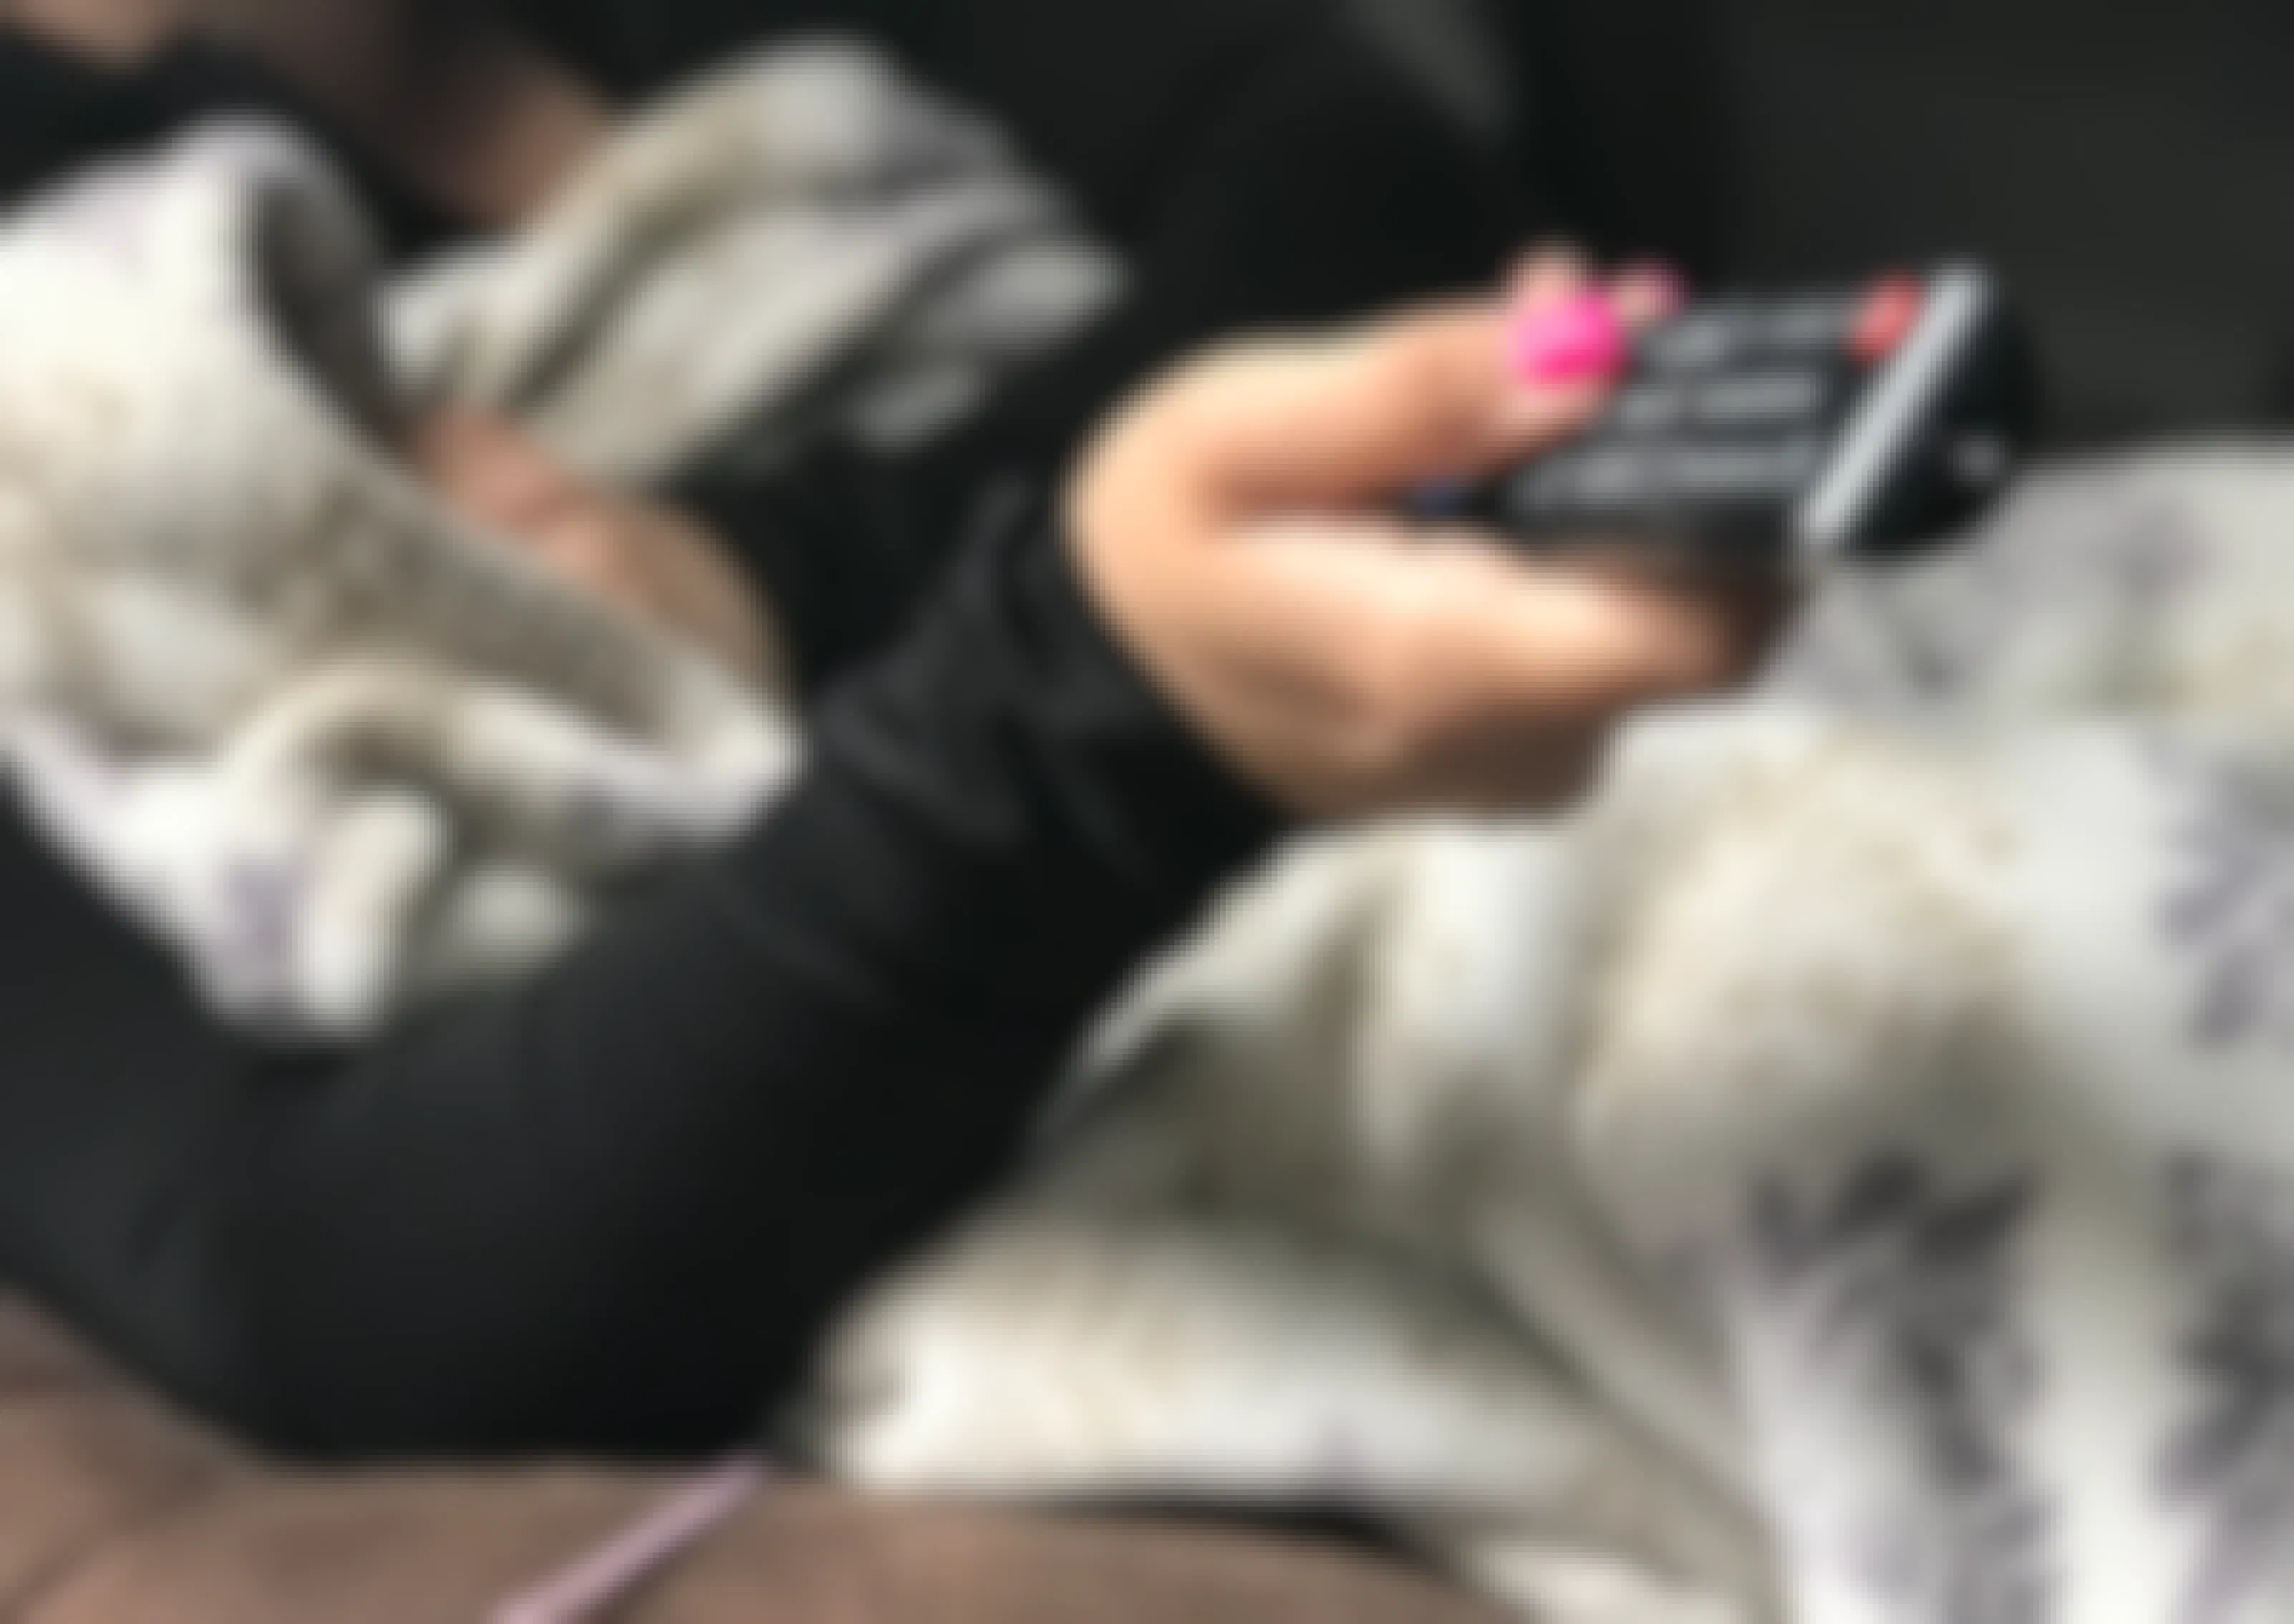 A person sitting on a couch with a blanket, holding a remote.